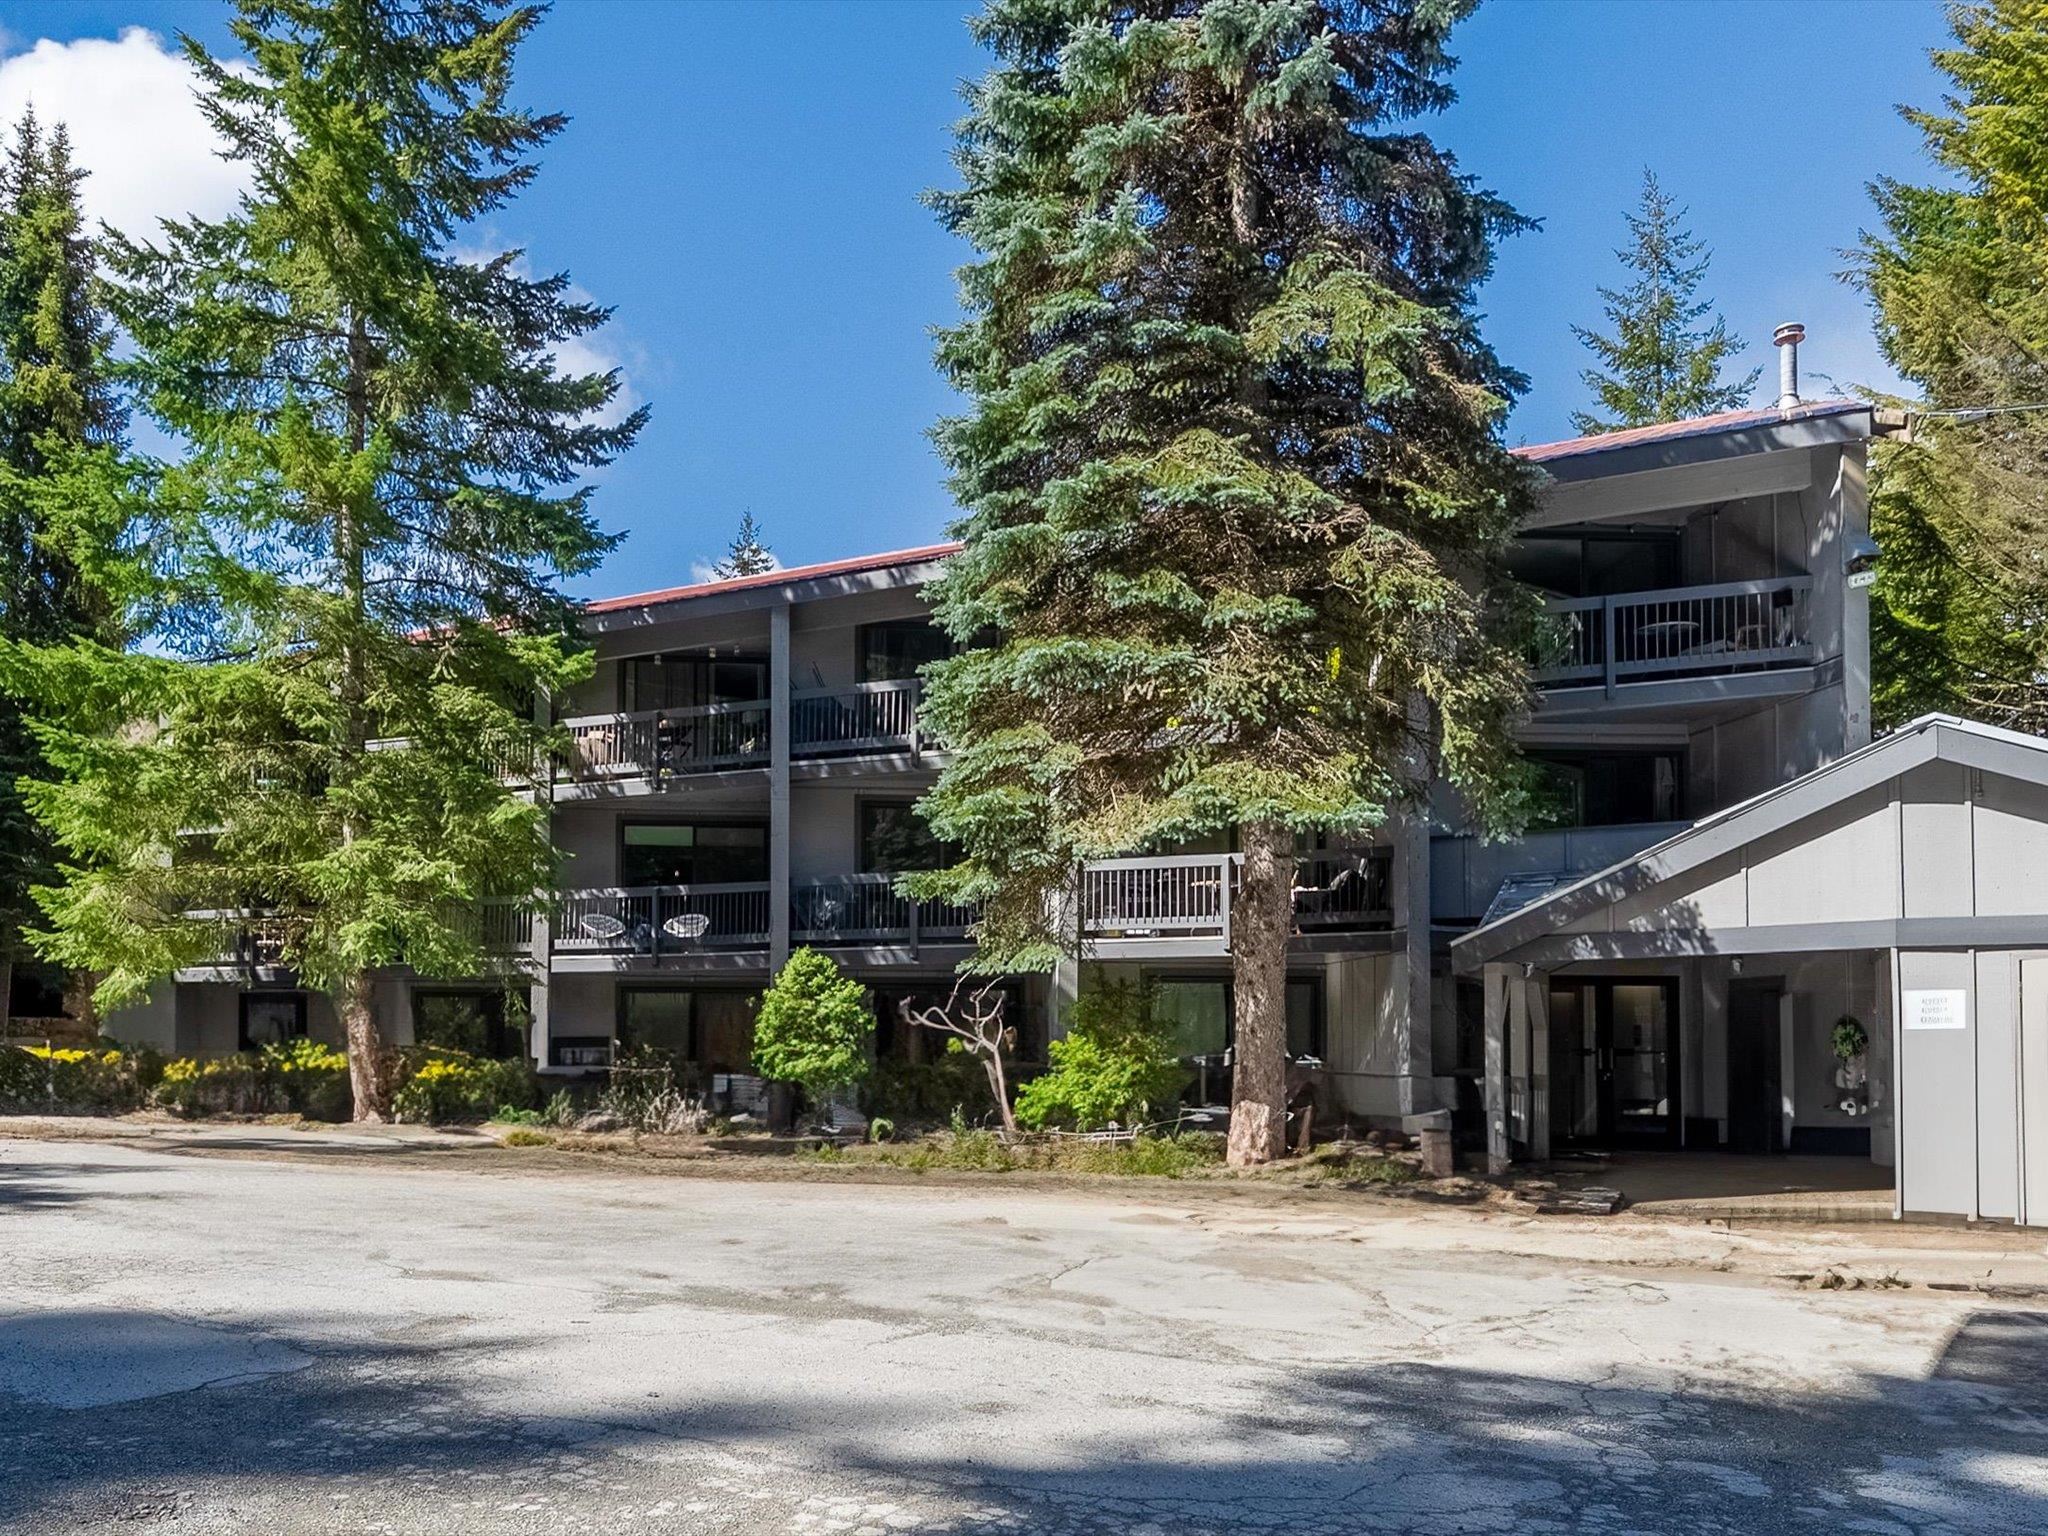 Listing image of 311 2109 WHISTLER ROAD